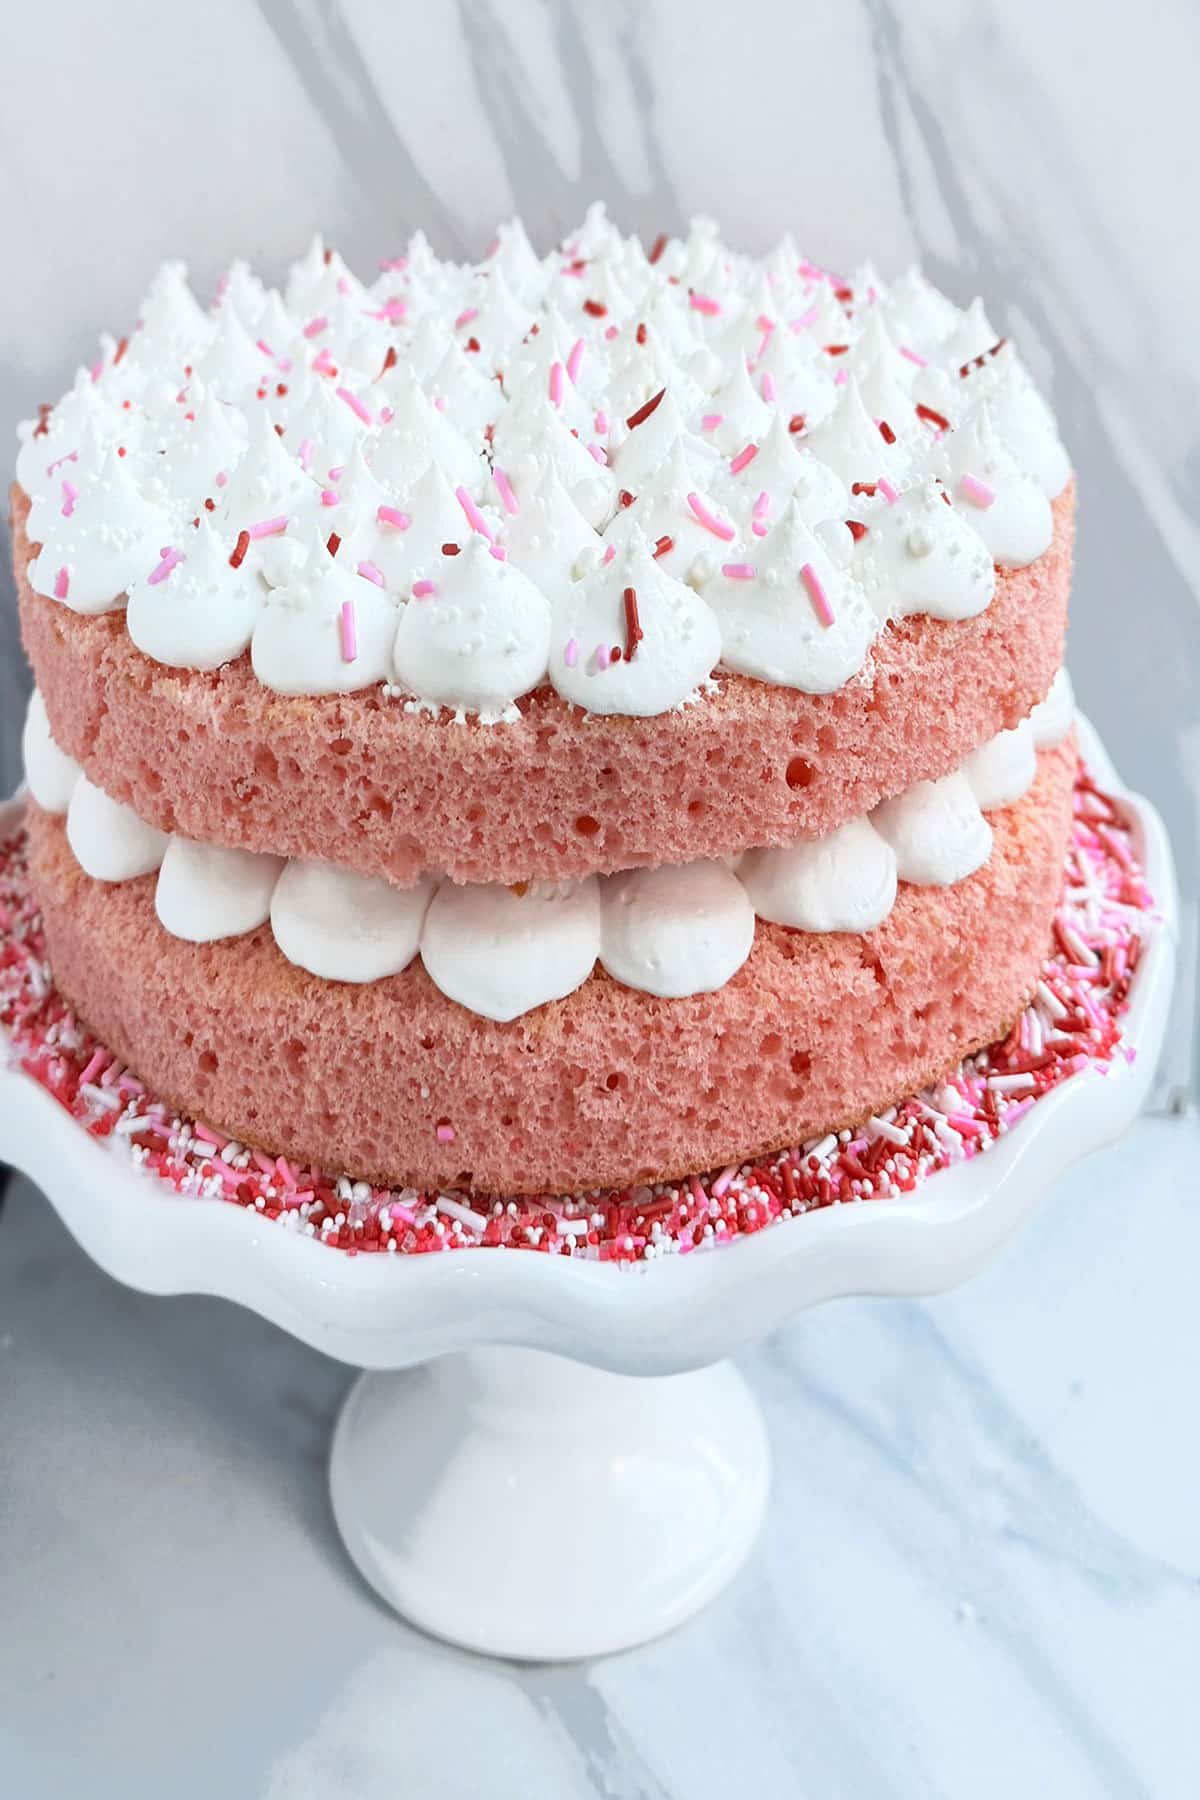 Easy Pink Champagne Cake From Scratch With Whipped Cream Frosting and Sprinkles on White Cake Stand. 